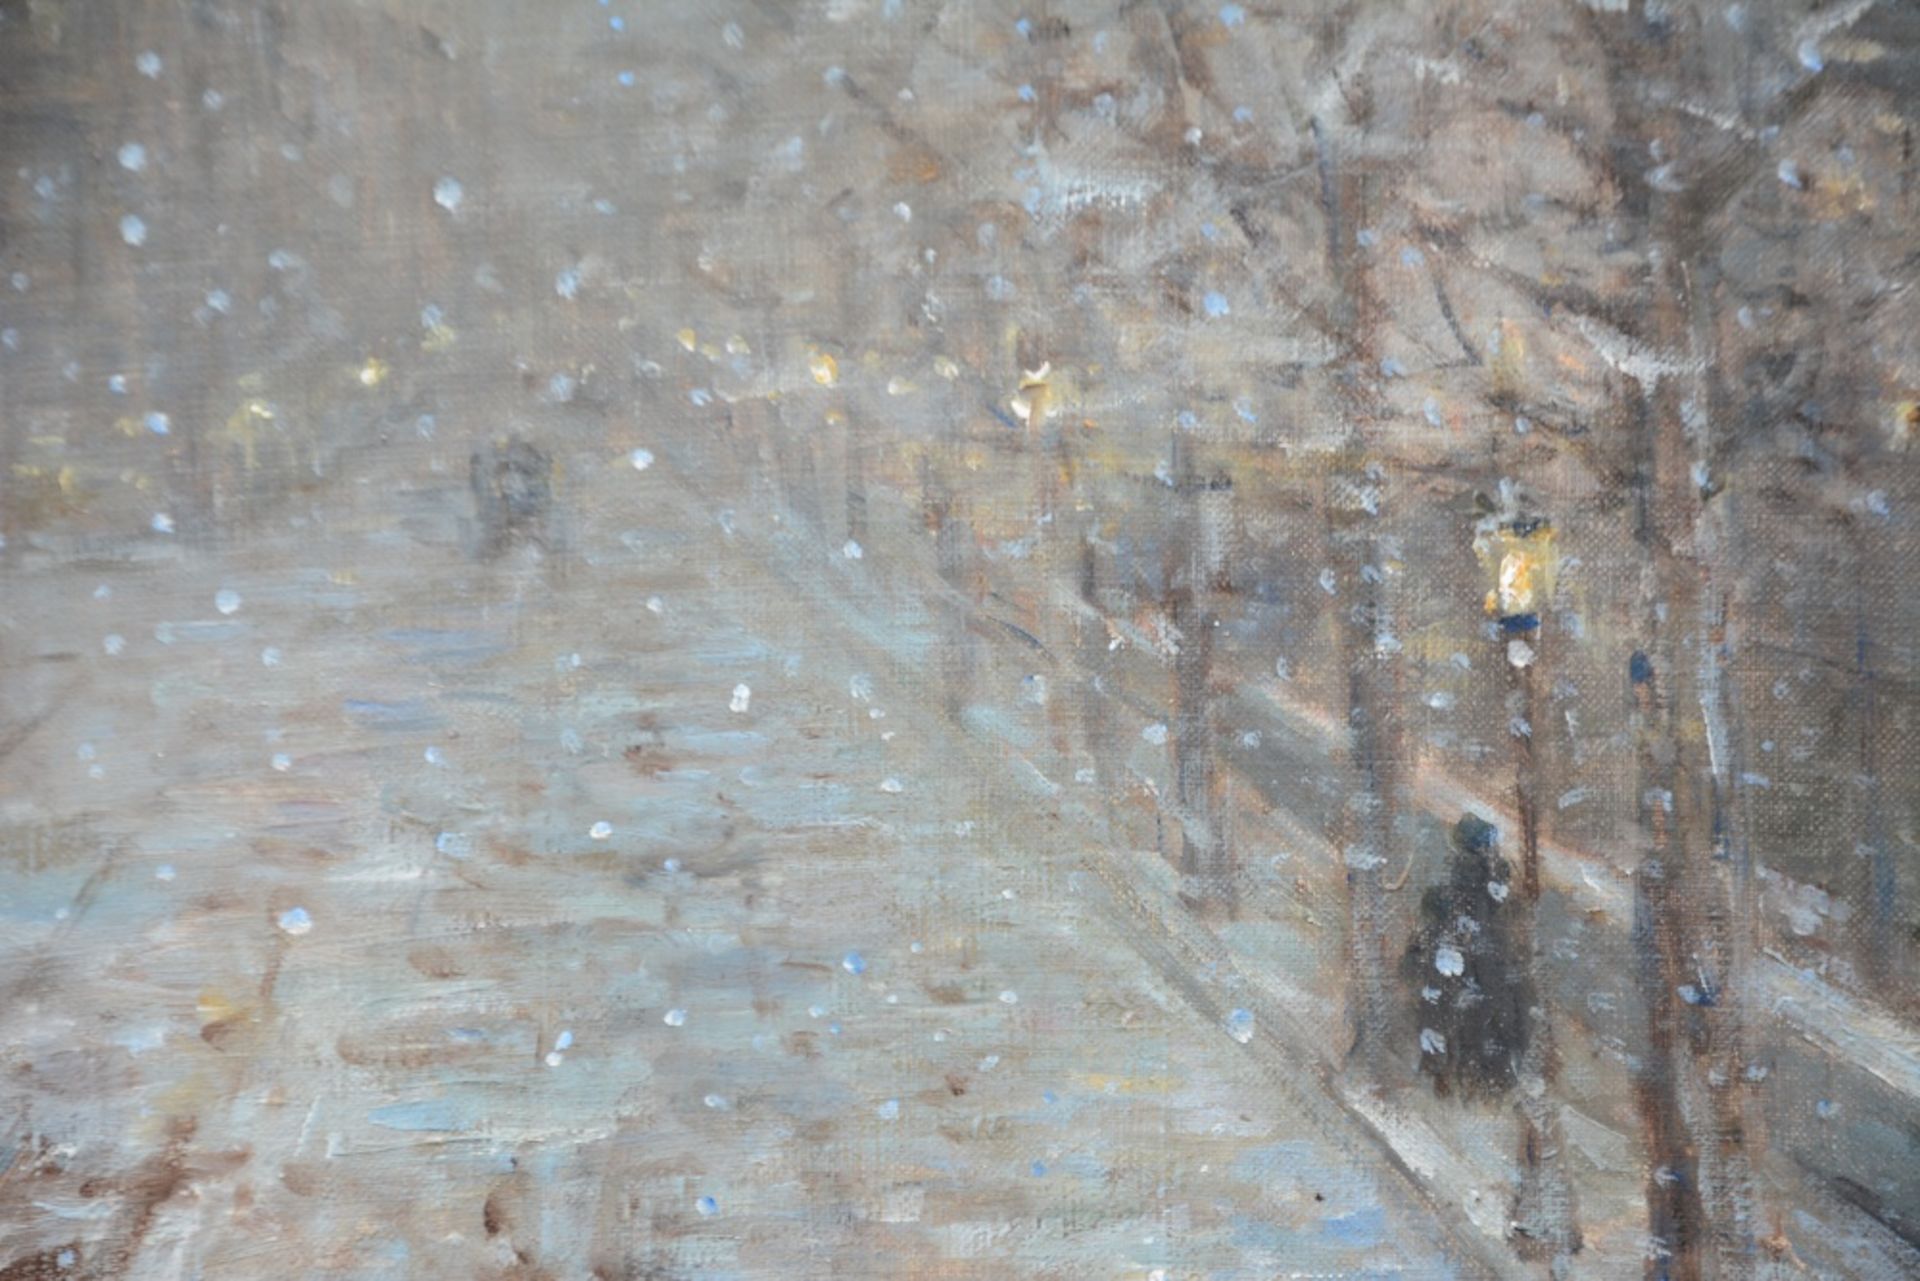 Lafont E.R., the cathedral of Notre Dame in Paris on a winter night, oil on canvas, 65,5 x 81,5 cm - Image 5 of 6